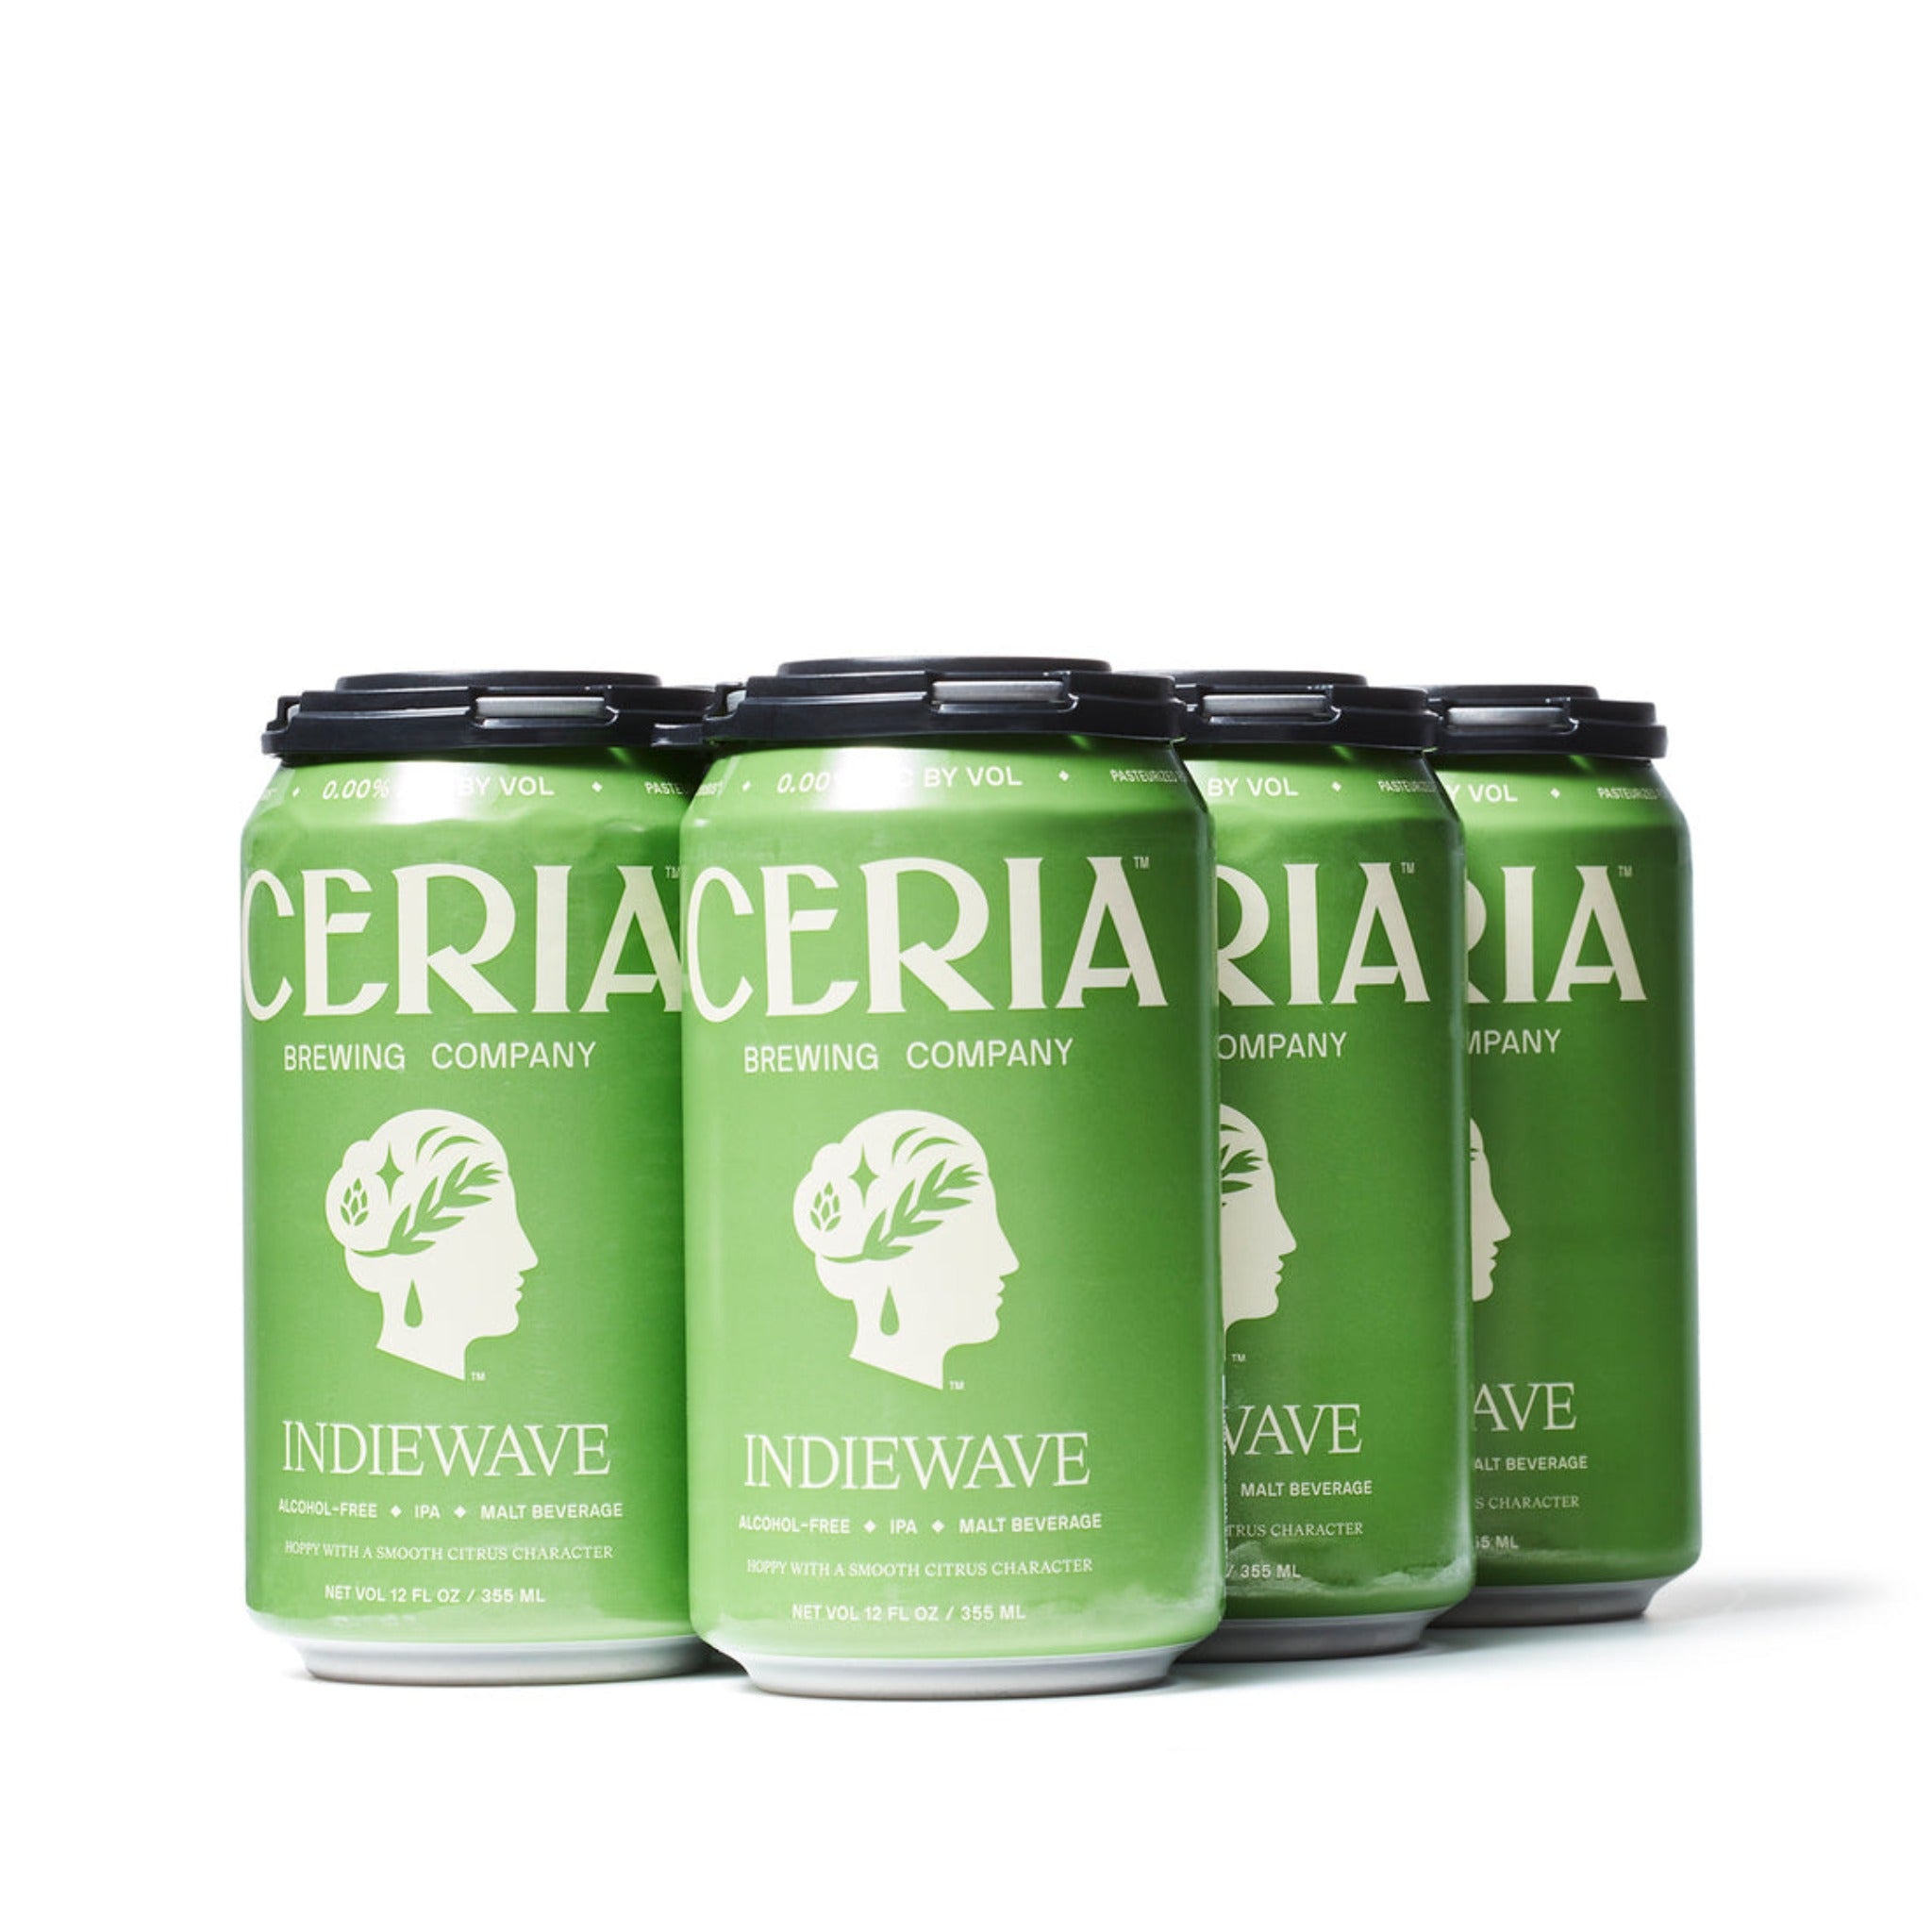 https://cdn.shopify.com/s/files/1/0730/5219/3070/files/Ceria-Brewing-Indiewave-Non-Alcoholic-IPA-6-Pack-Front-257_1100x_621a6120-1118-48b6-b083-2d38cccac15e.jpg?v=1699049075&width=2048